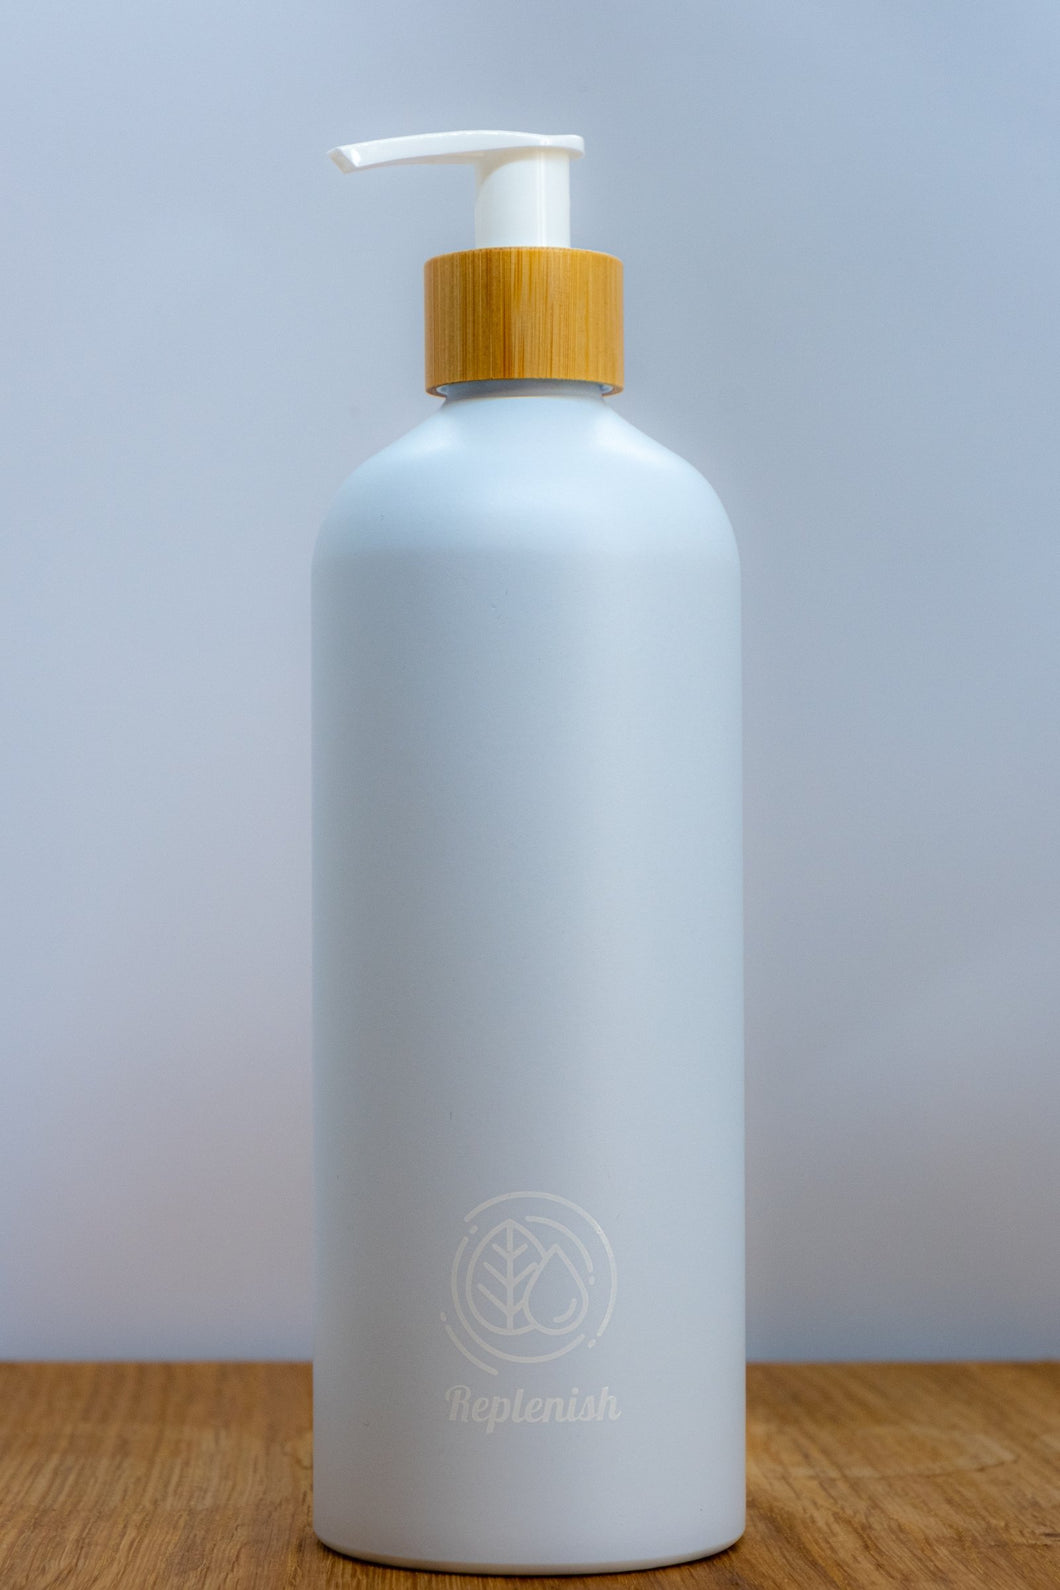 Replenish Bottle with Bamboo Lotion Pump filled with 500ml of Miniml Hand Product